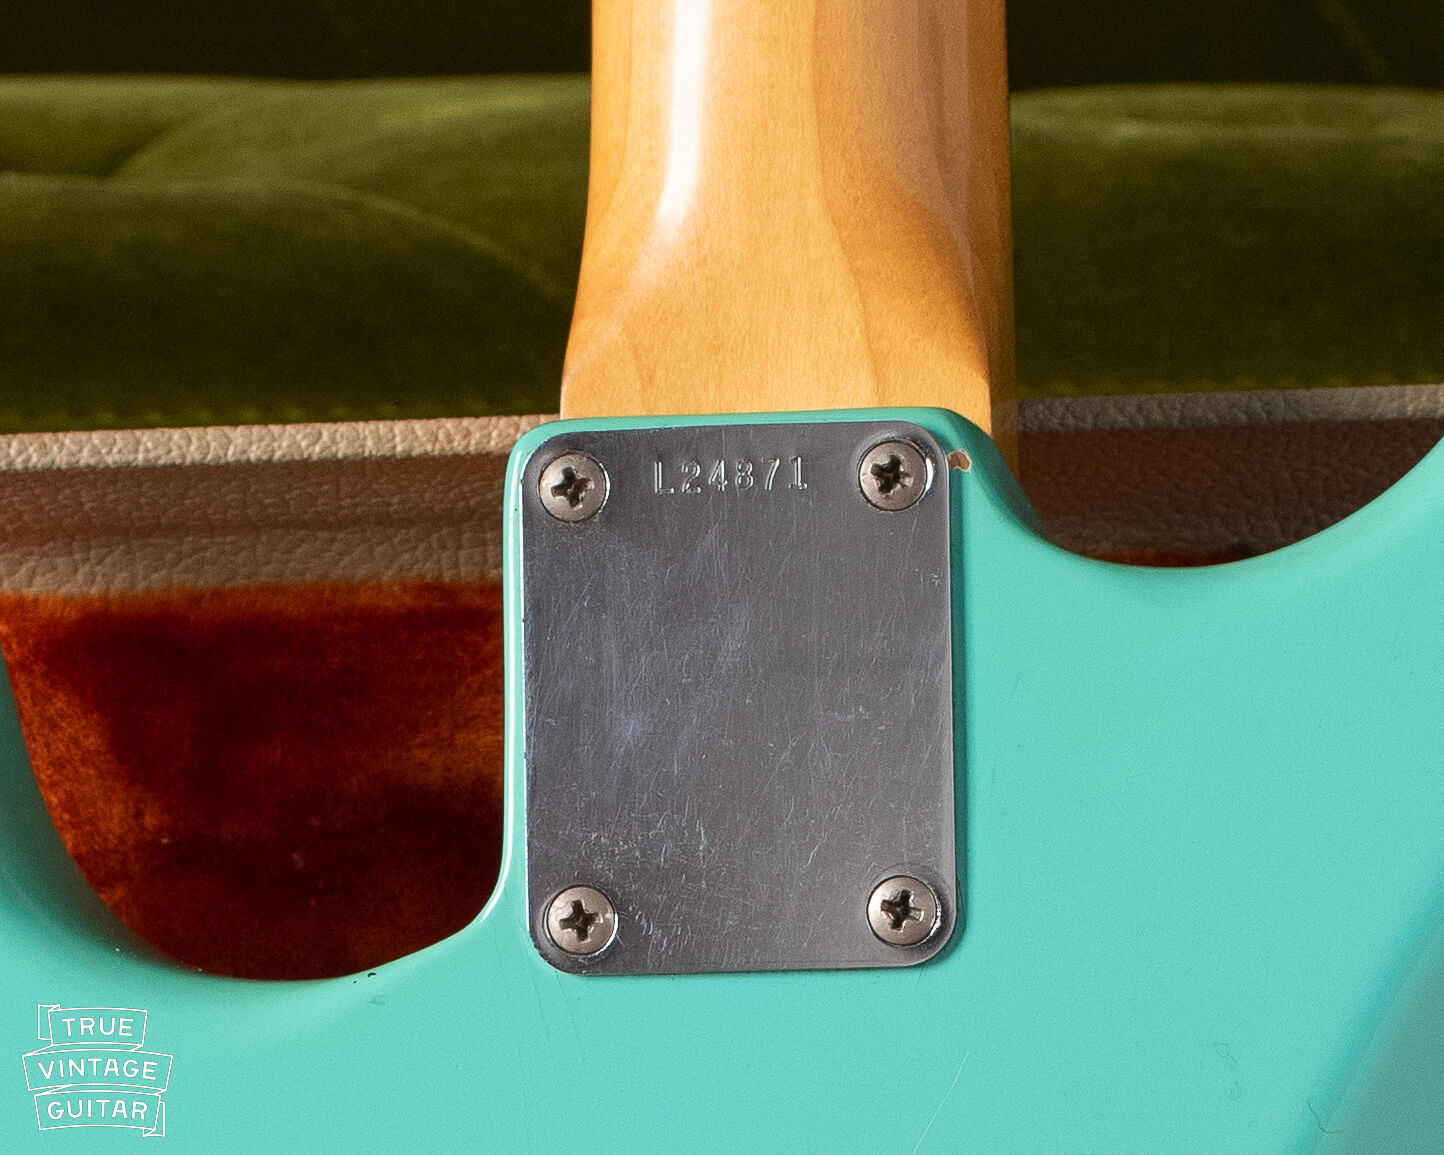 L series neck plate on 1964 Stratocaster